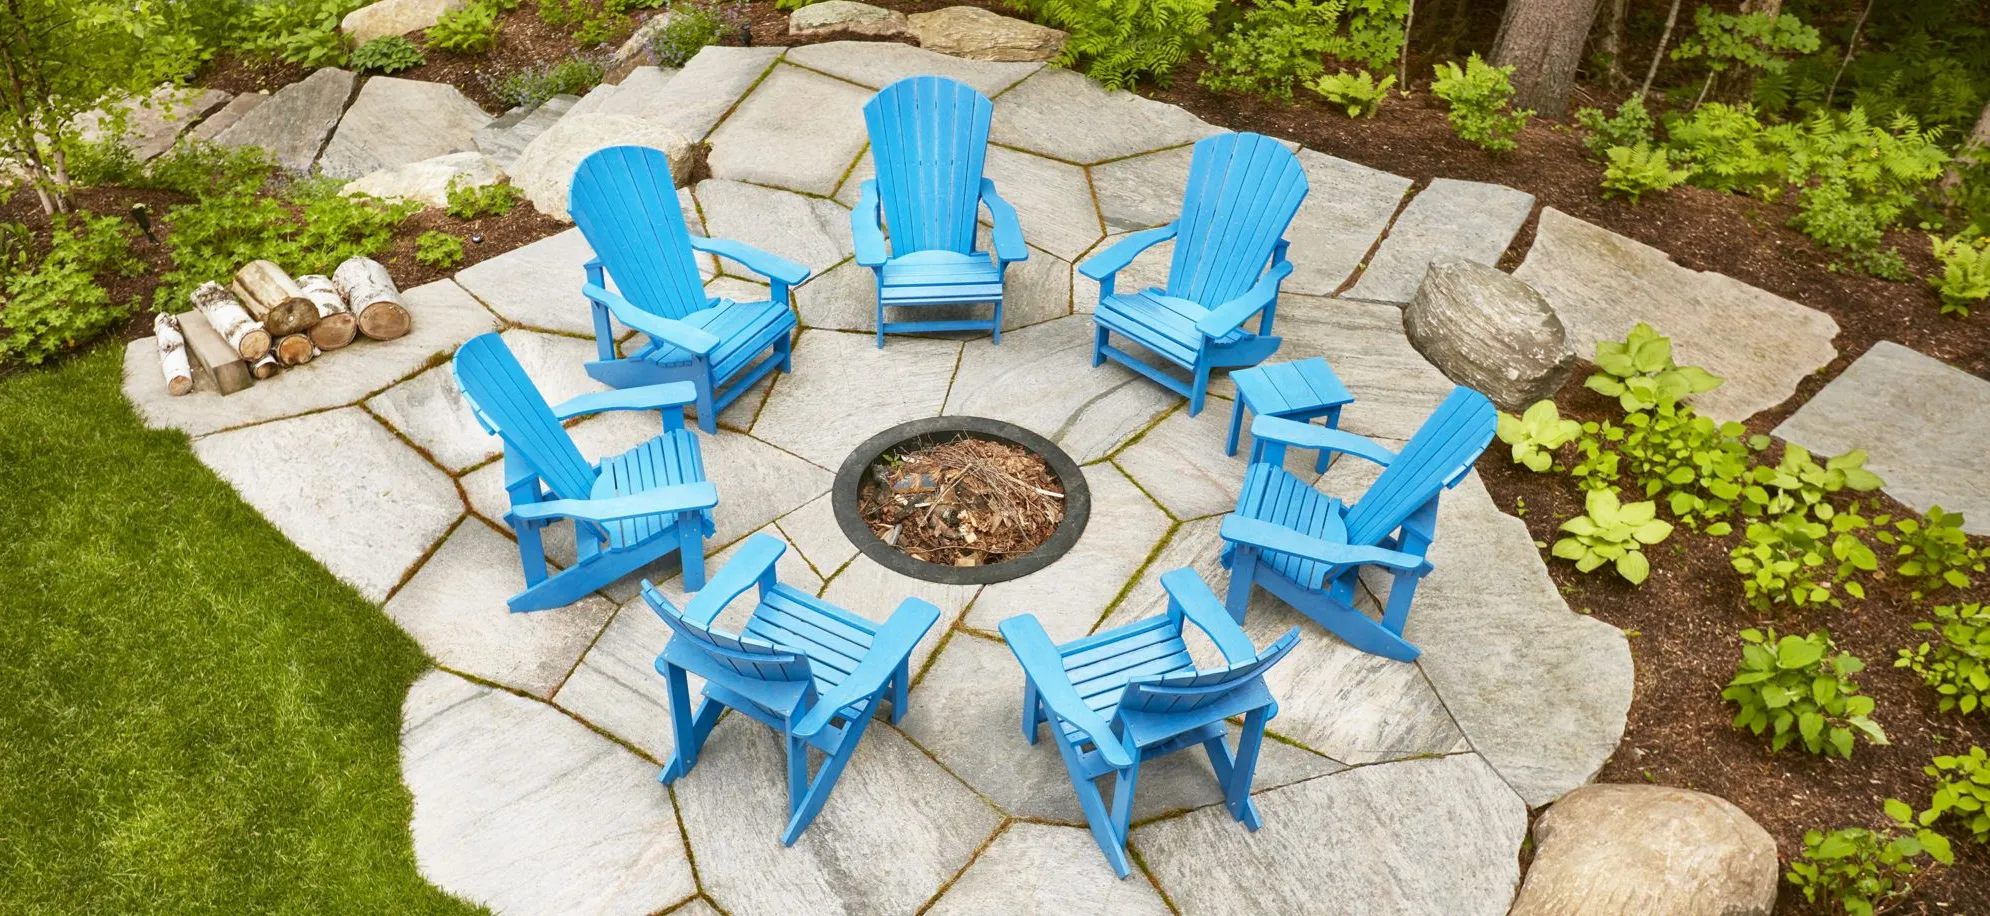 Generation Recycled Outdoor Upright Adirondack Chair in Blue by C.R. Plastic Products